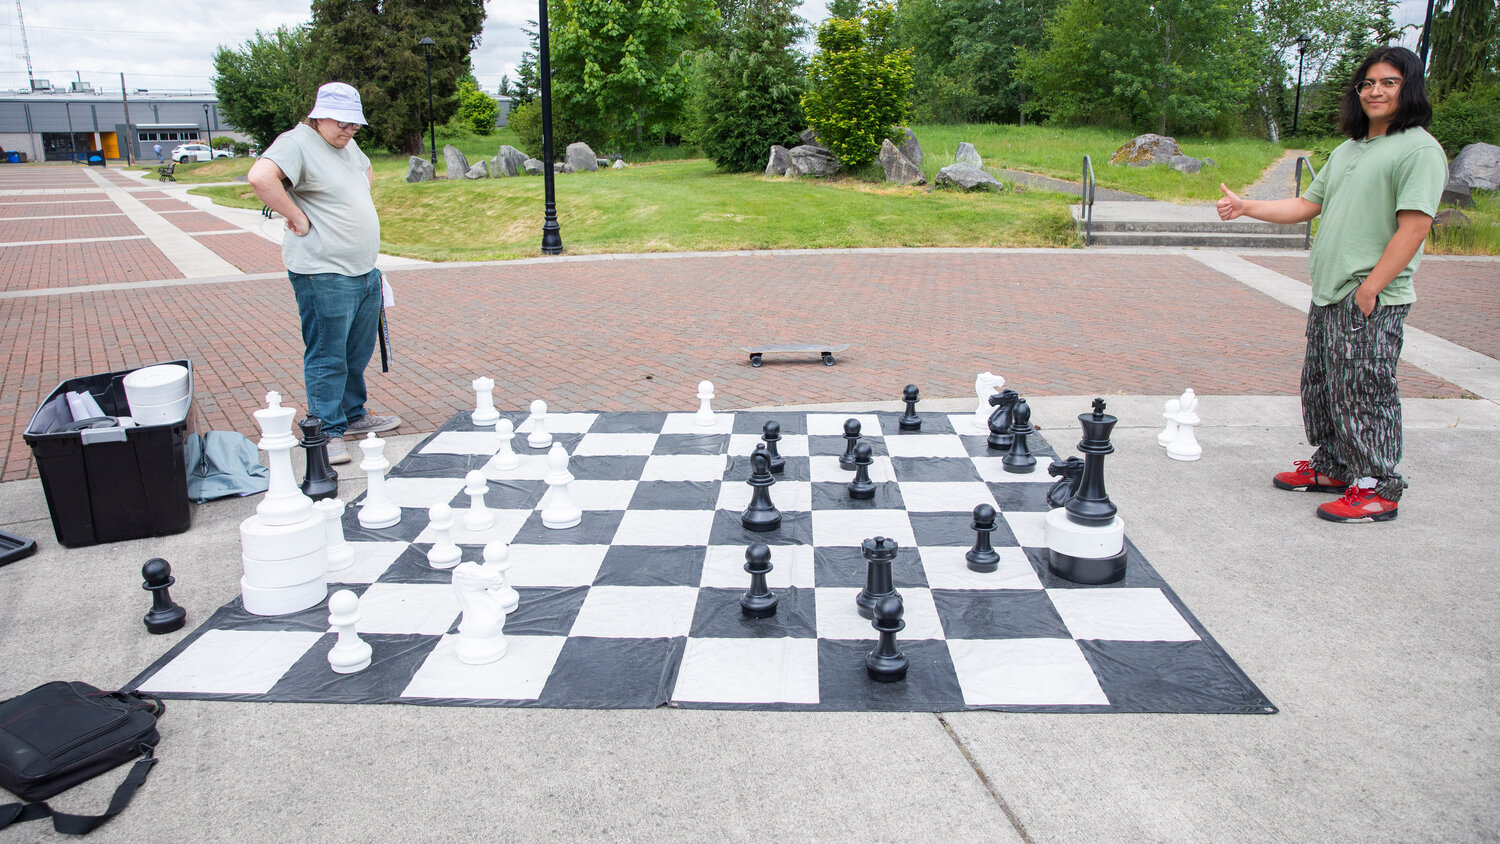 Colten Staggs and Kai Ramirez play chess during Spring Fest at Centralia College on Tuesday, May 23. The annual event, which is open to Centralia College students at no cost, continues from 10 a.m. to 2 p.m. Thursday on the plaza and esplanade.